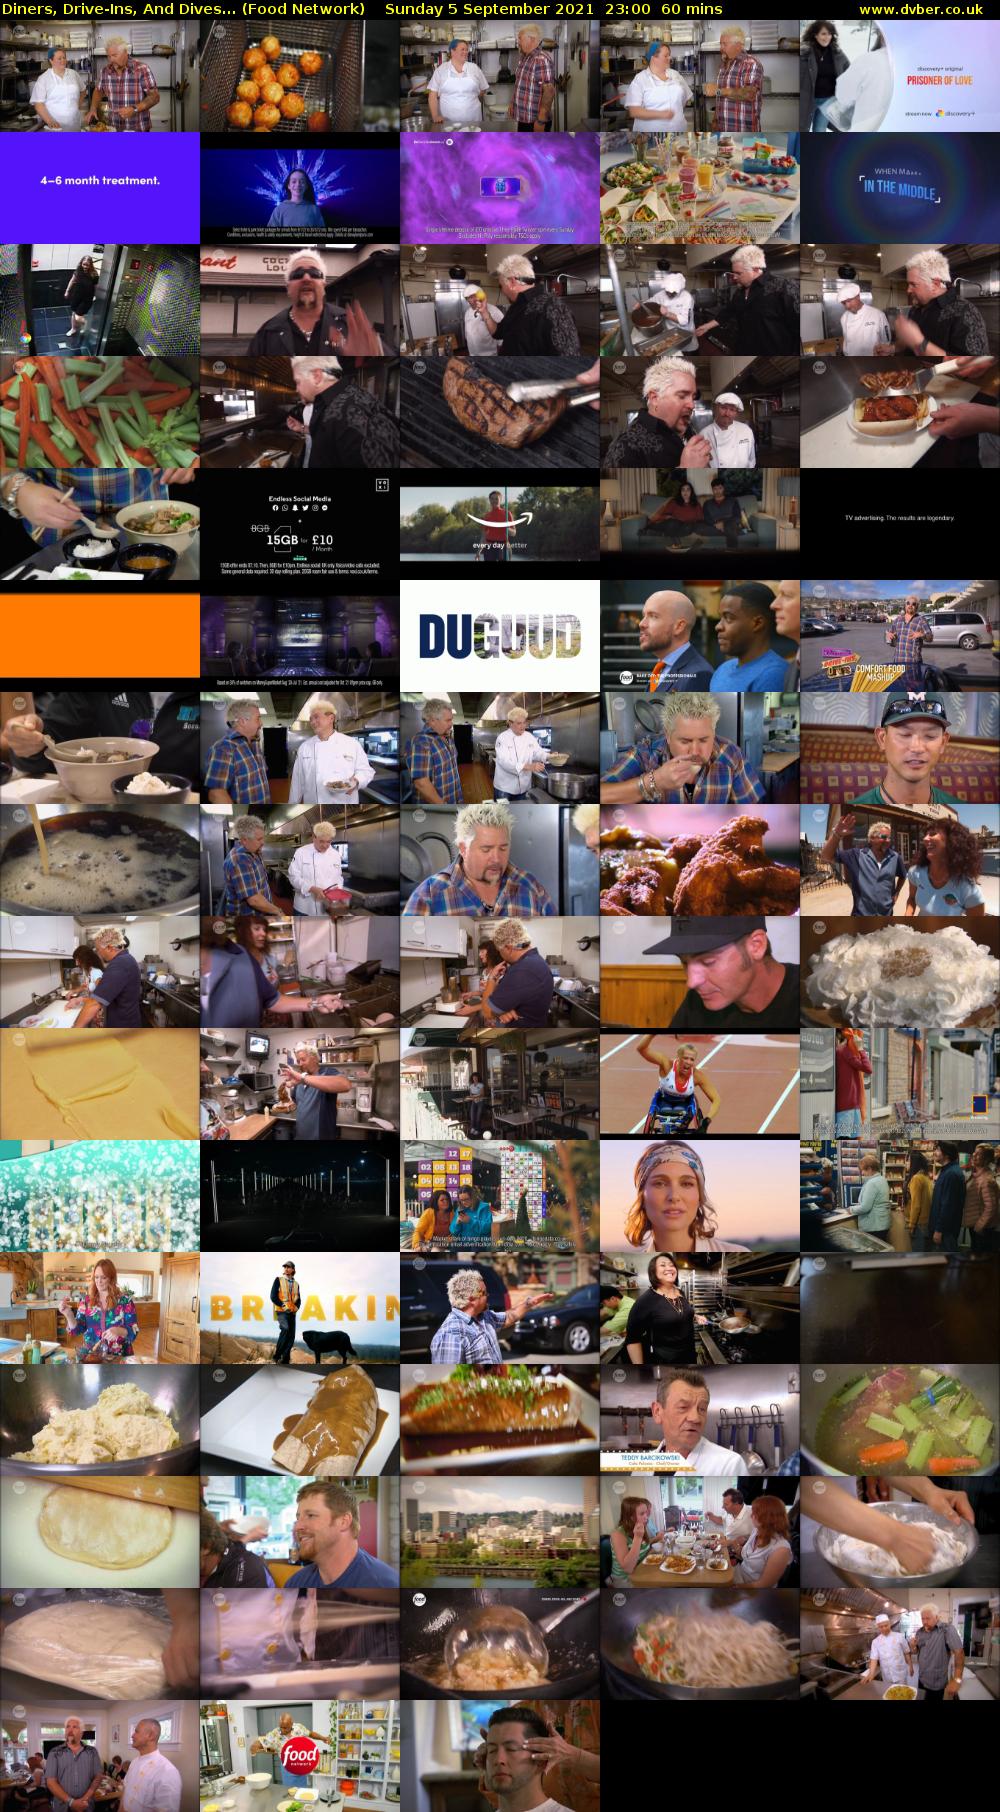 Diners, Drive-Ins, And Dives... (Food Network) Monday 6 September 2021 00:00 - 01:00